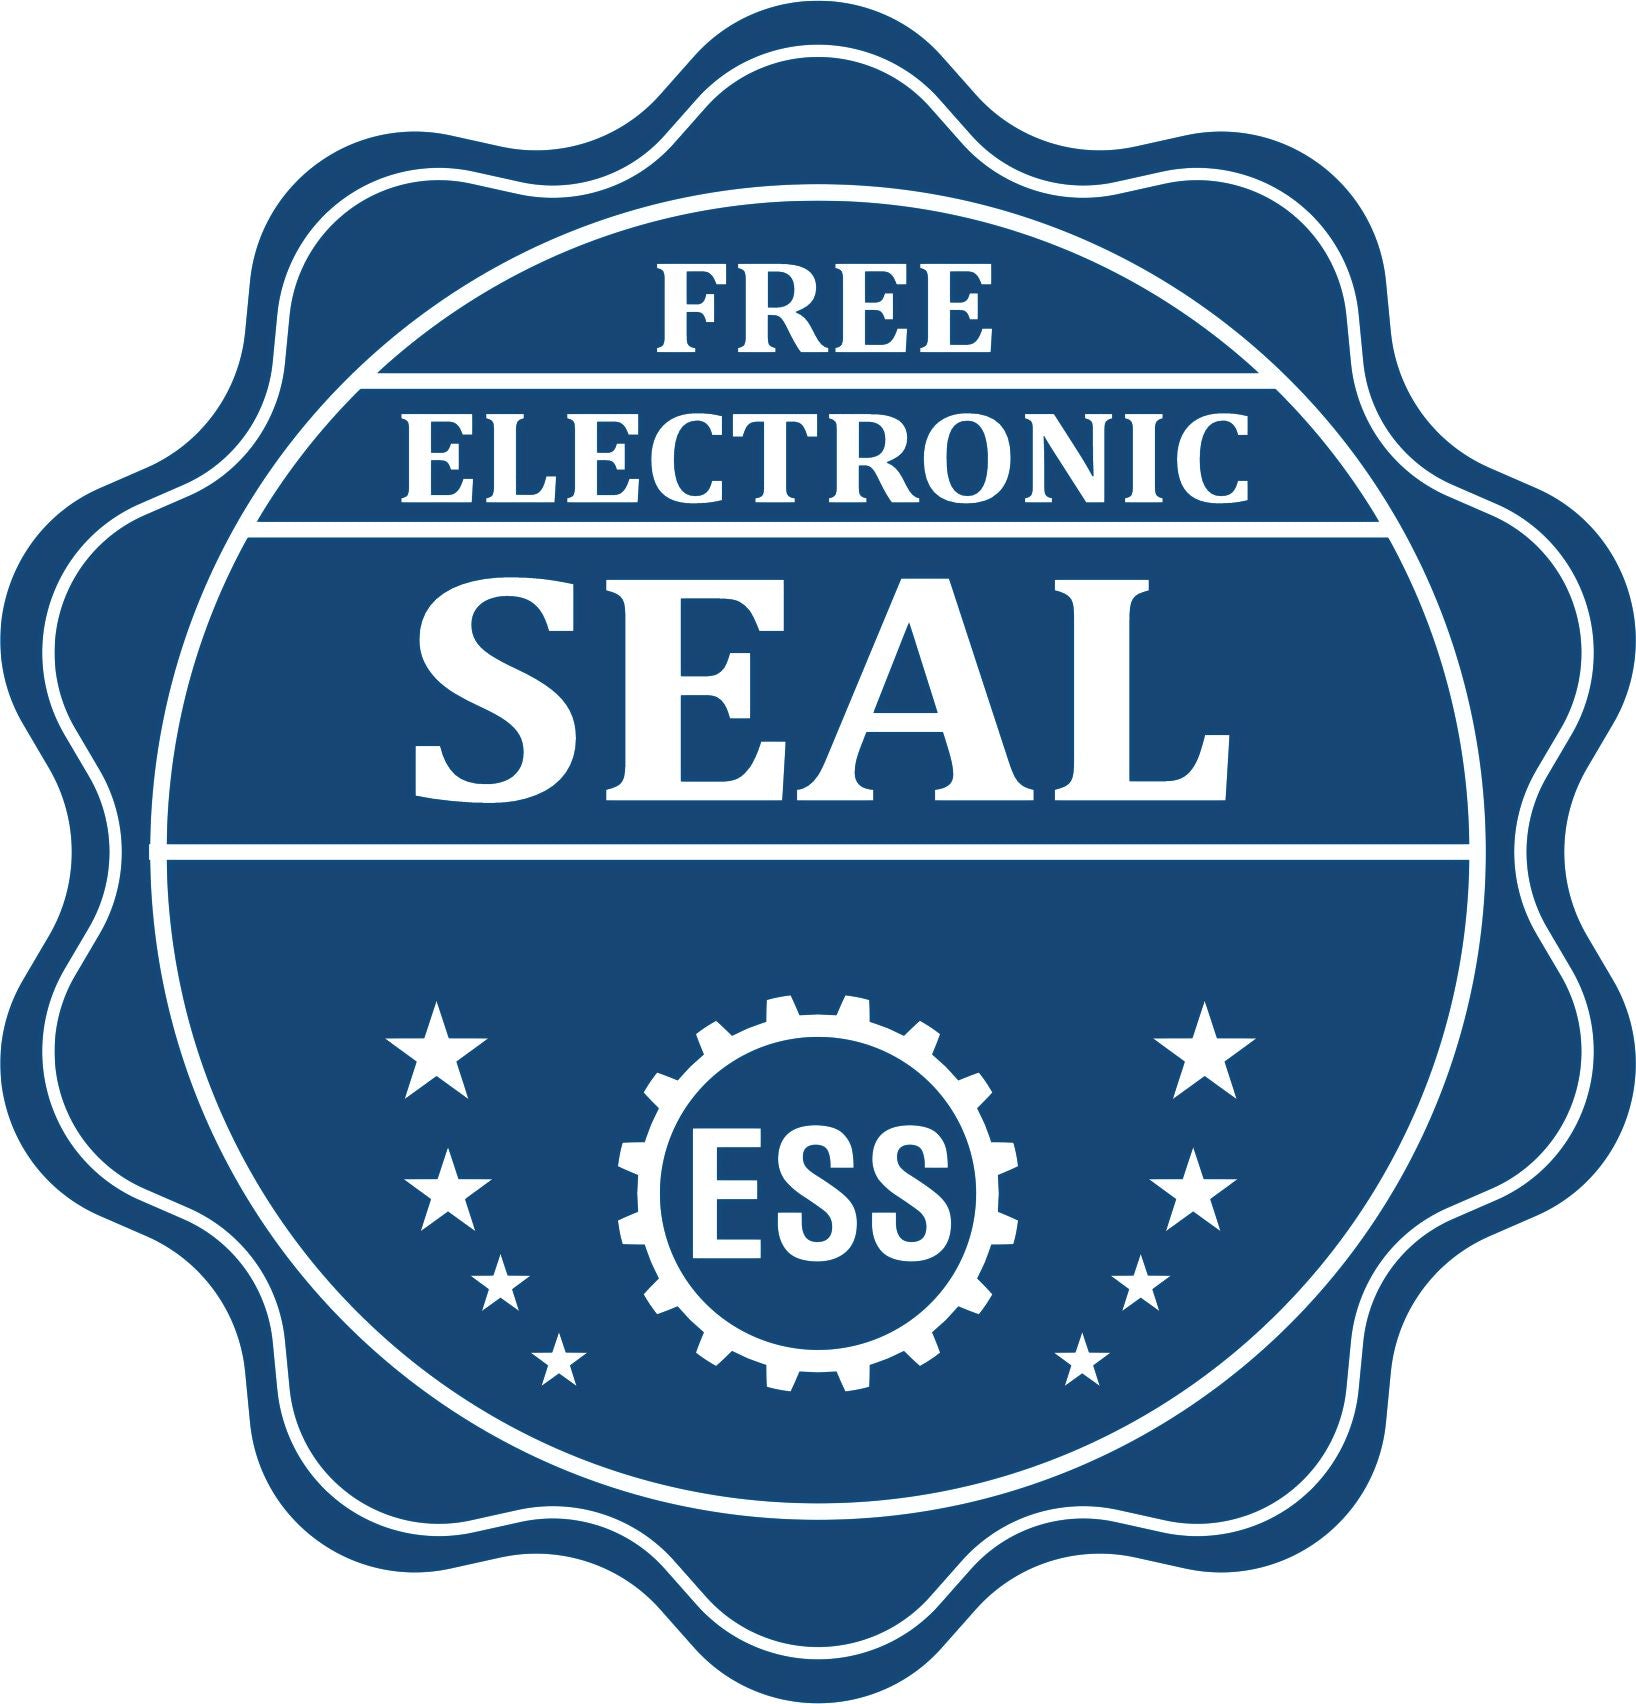 A badge showing a free electronic seal for the Handheld Arizona Land Surveyor Seal with stars and the ESS gear on the emblem.